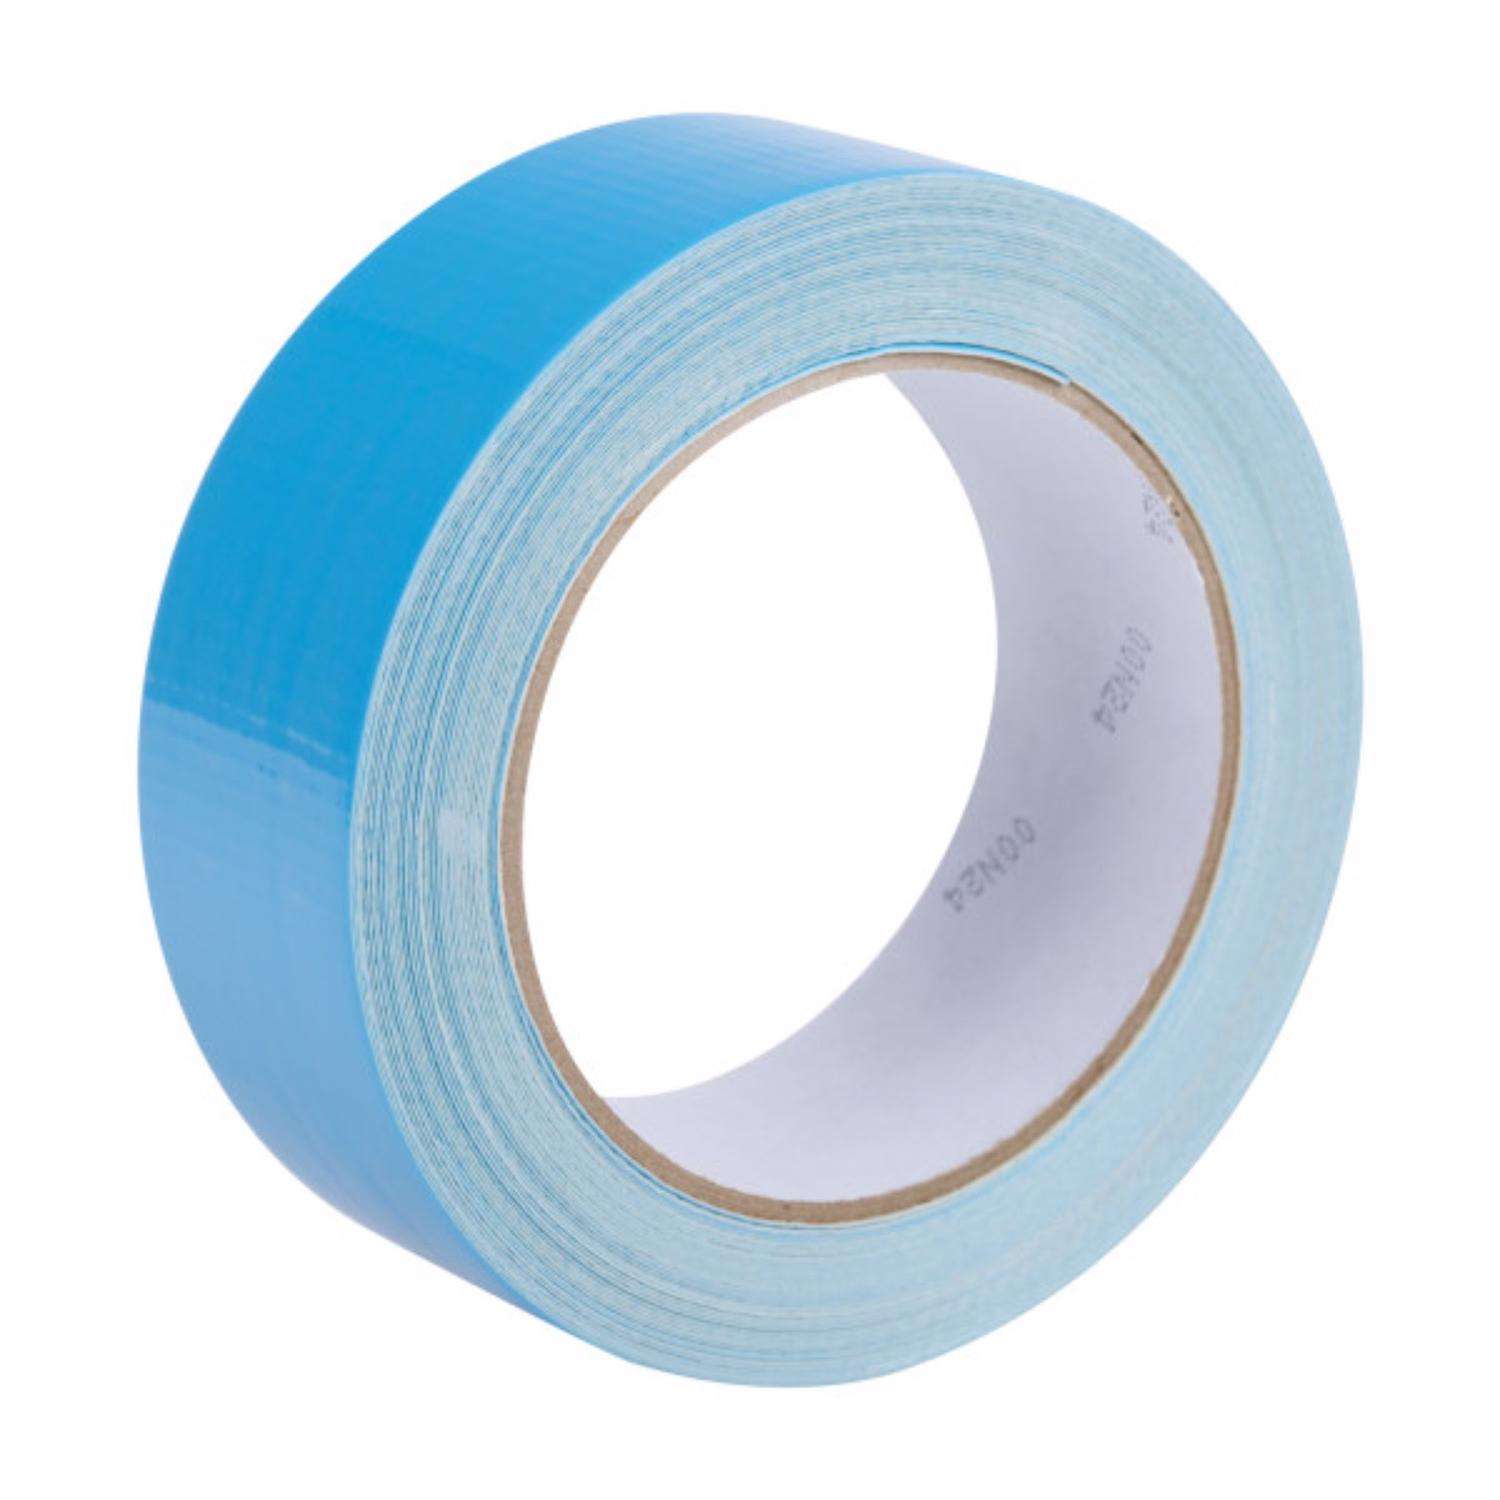 Double Sided Tape, Weather Resistant, 1.41-In. x 8-Yd.